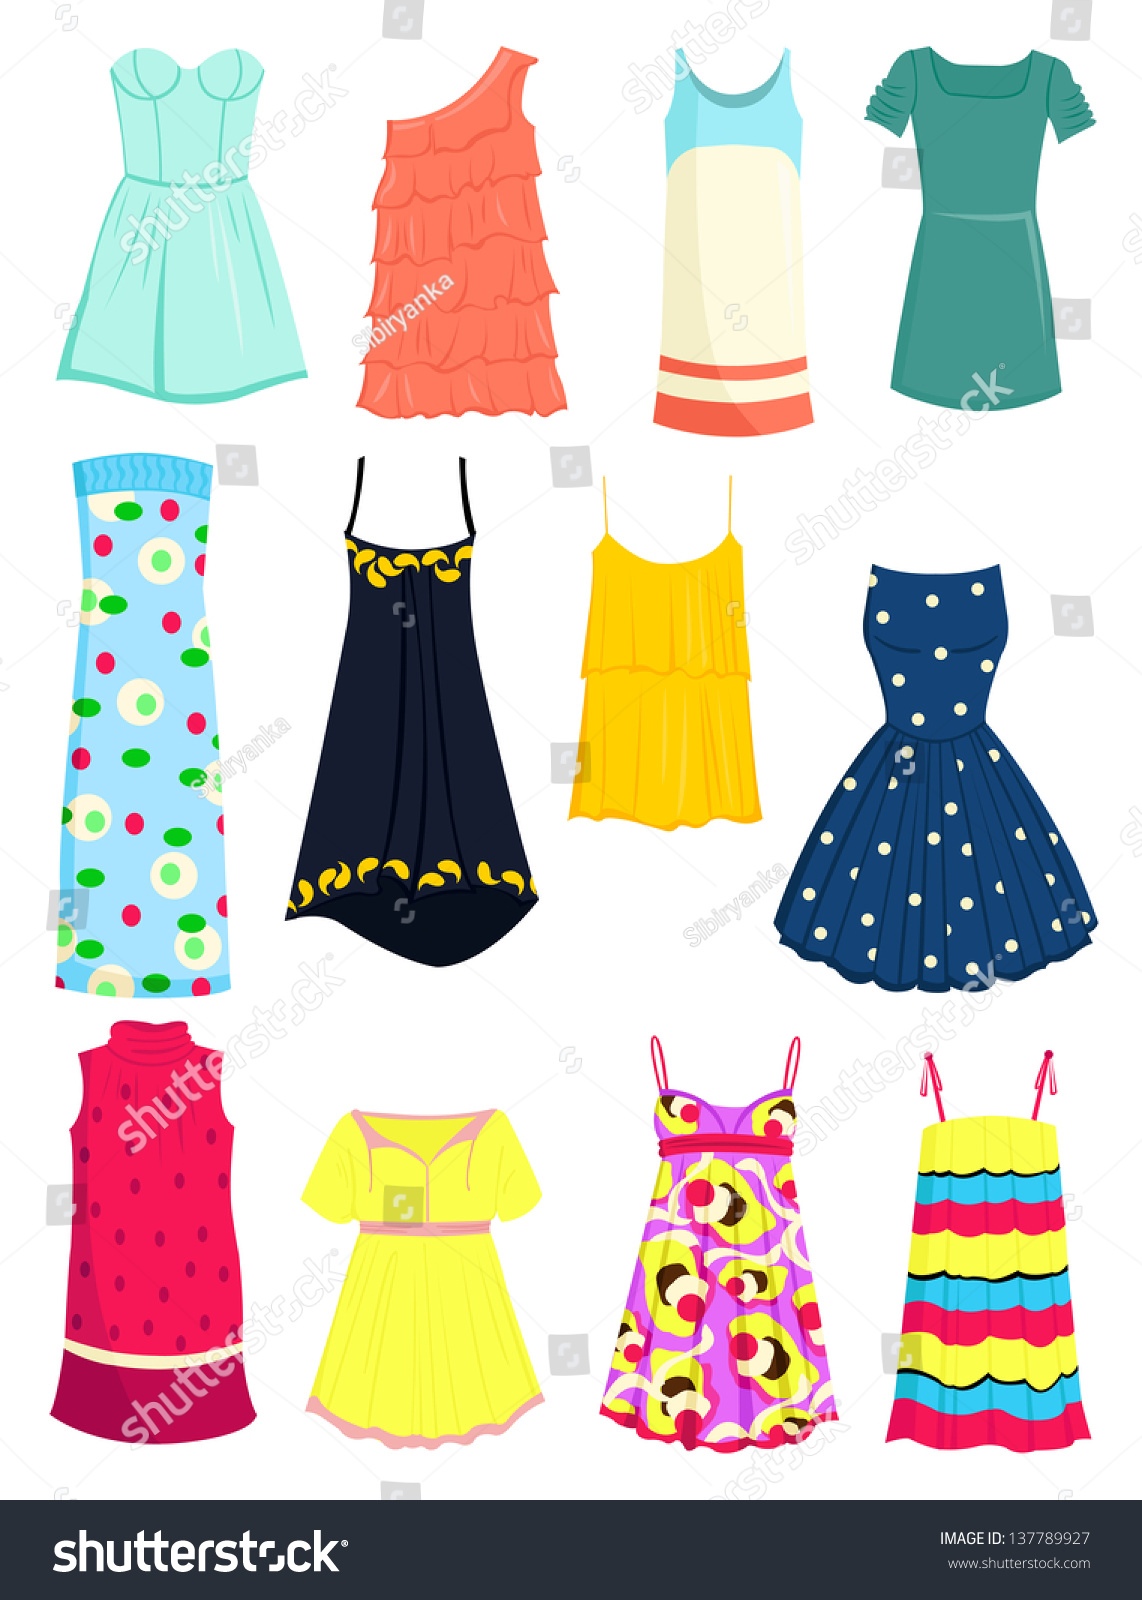 summer clothes clipart images - photo #31